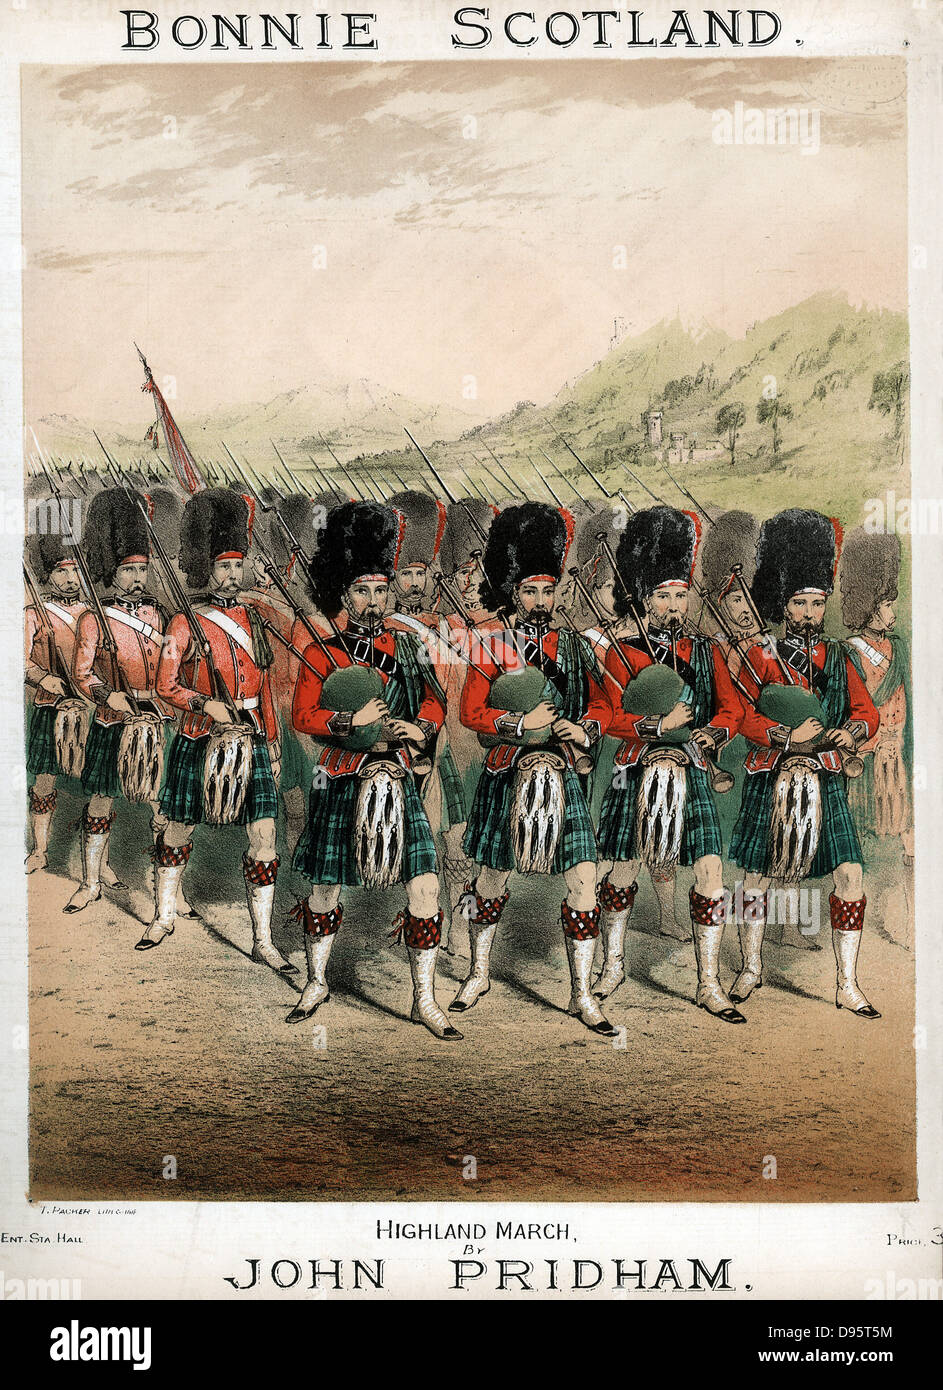 Pipers leading a march; kilted Highland Footguards wearing Busbies and Sporrans. Coloured lithograph from cover of 'Bonnie Scotland' Highland march; composer John Pridham, c1860 Stock Photo